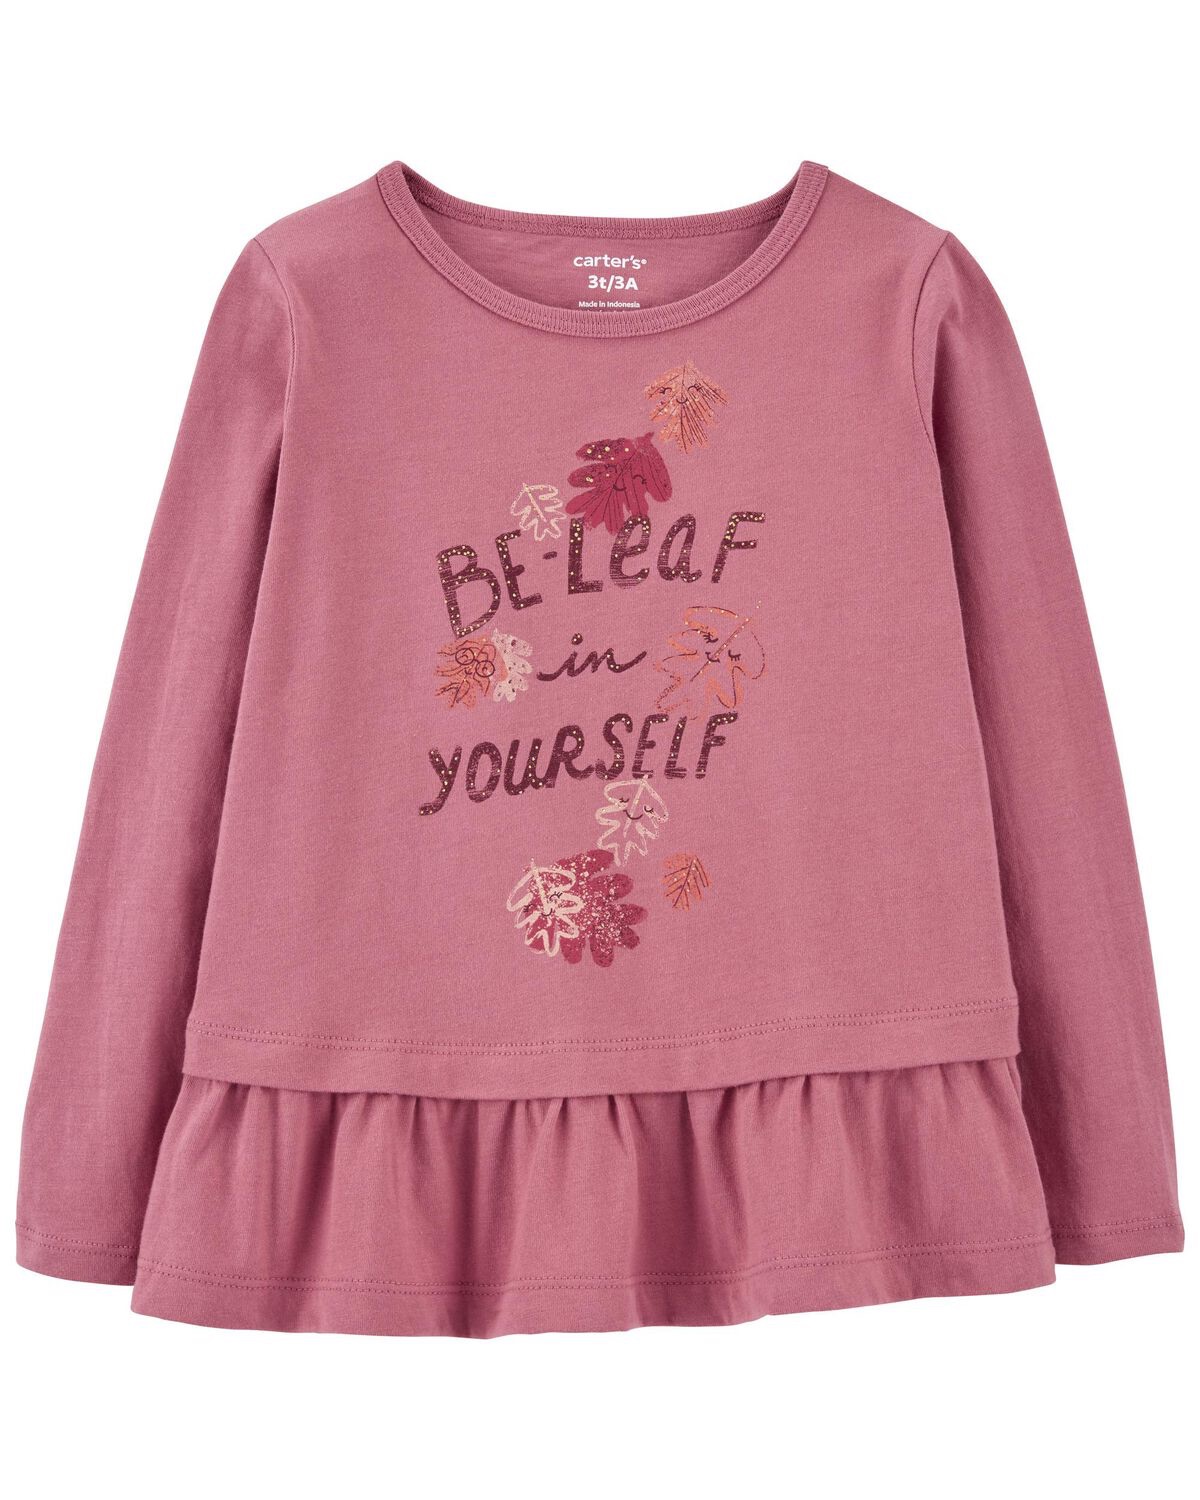 Pink Toddler Be-Leaf In Yourself Peplum Graphic Tee | carters.com